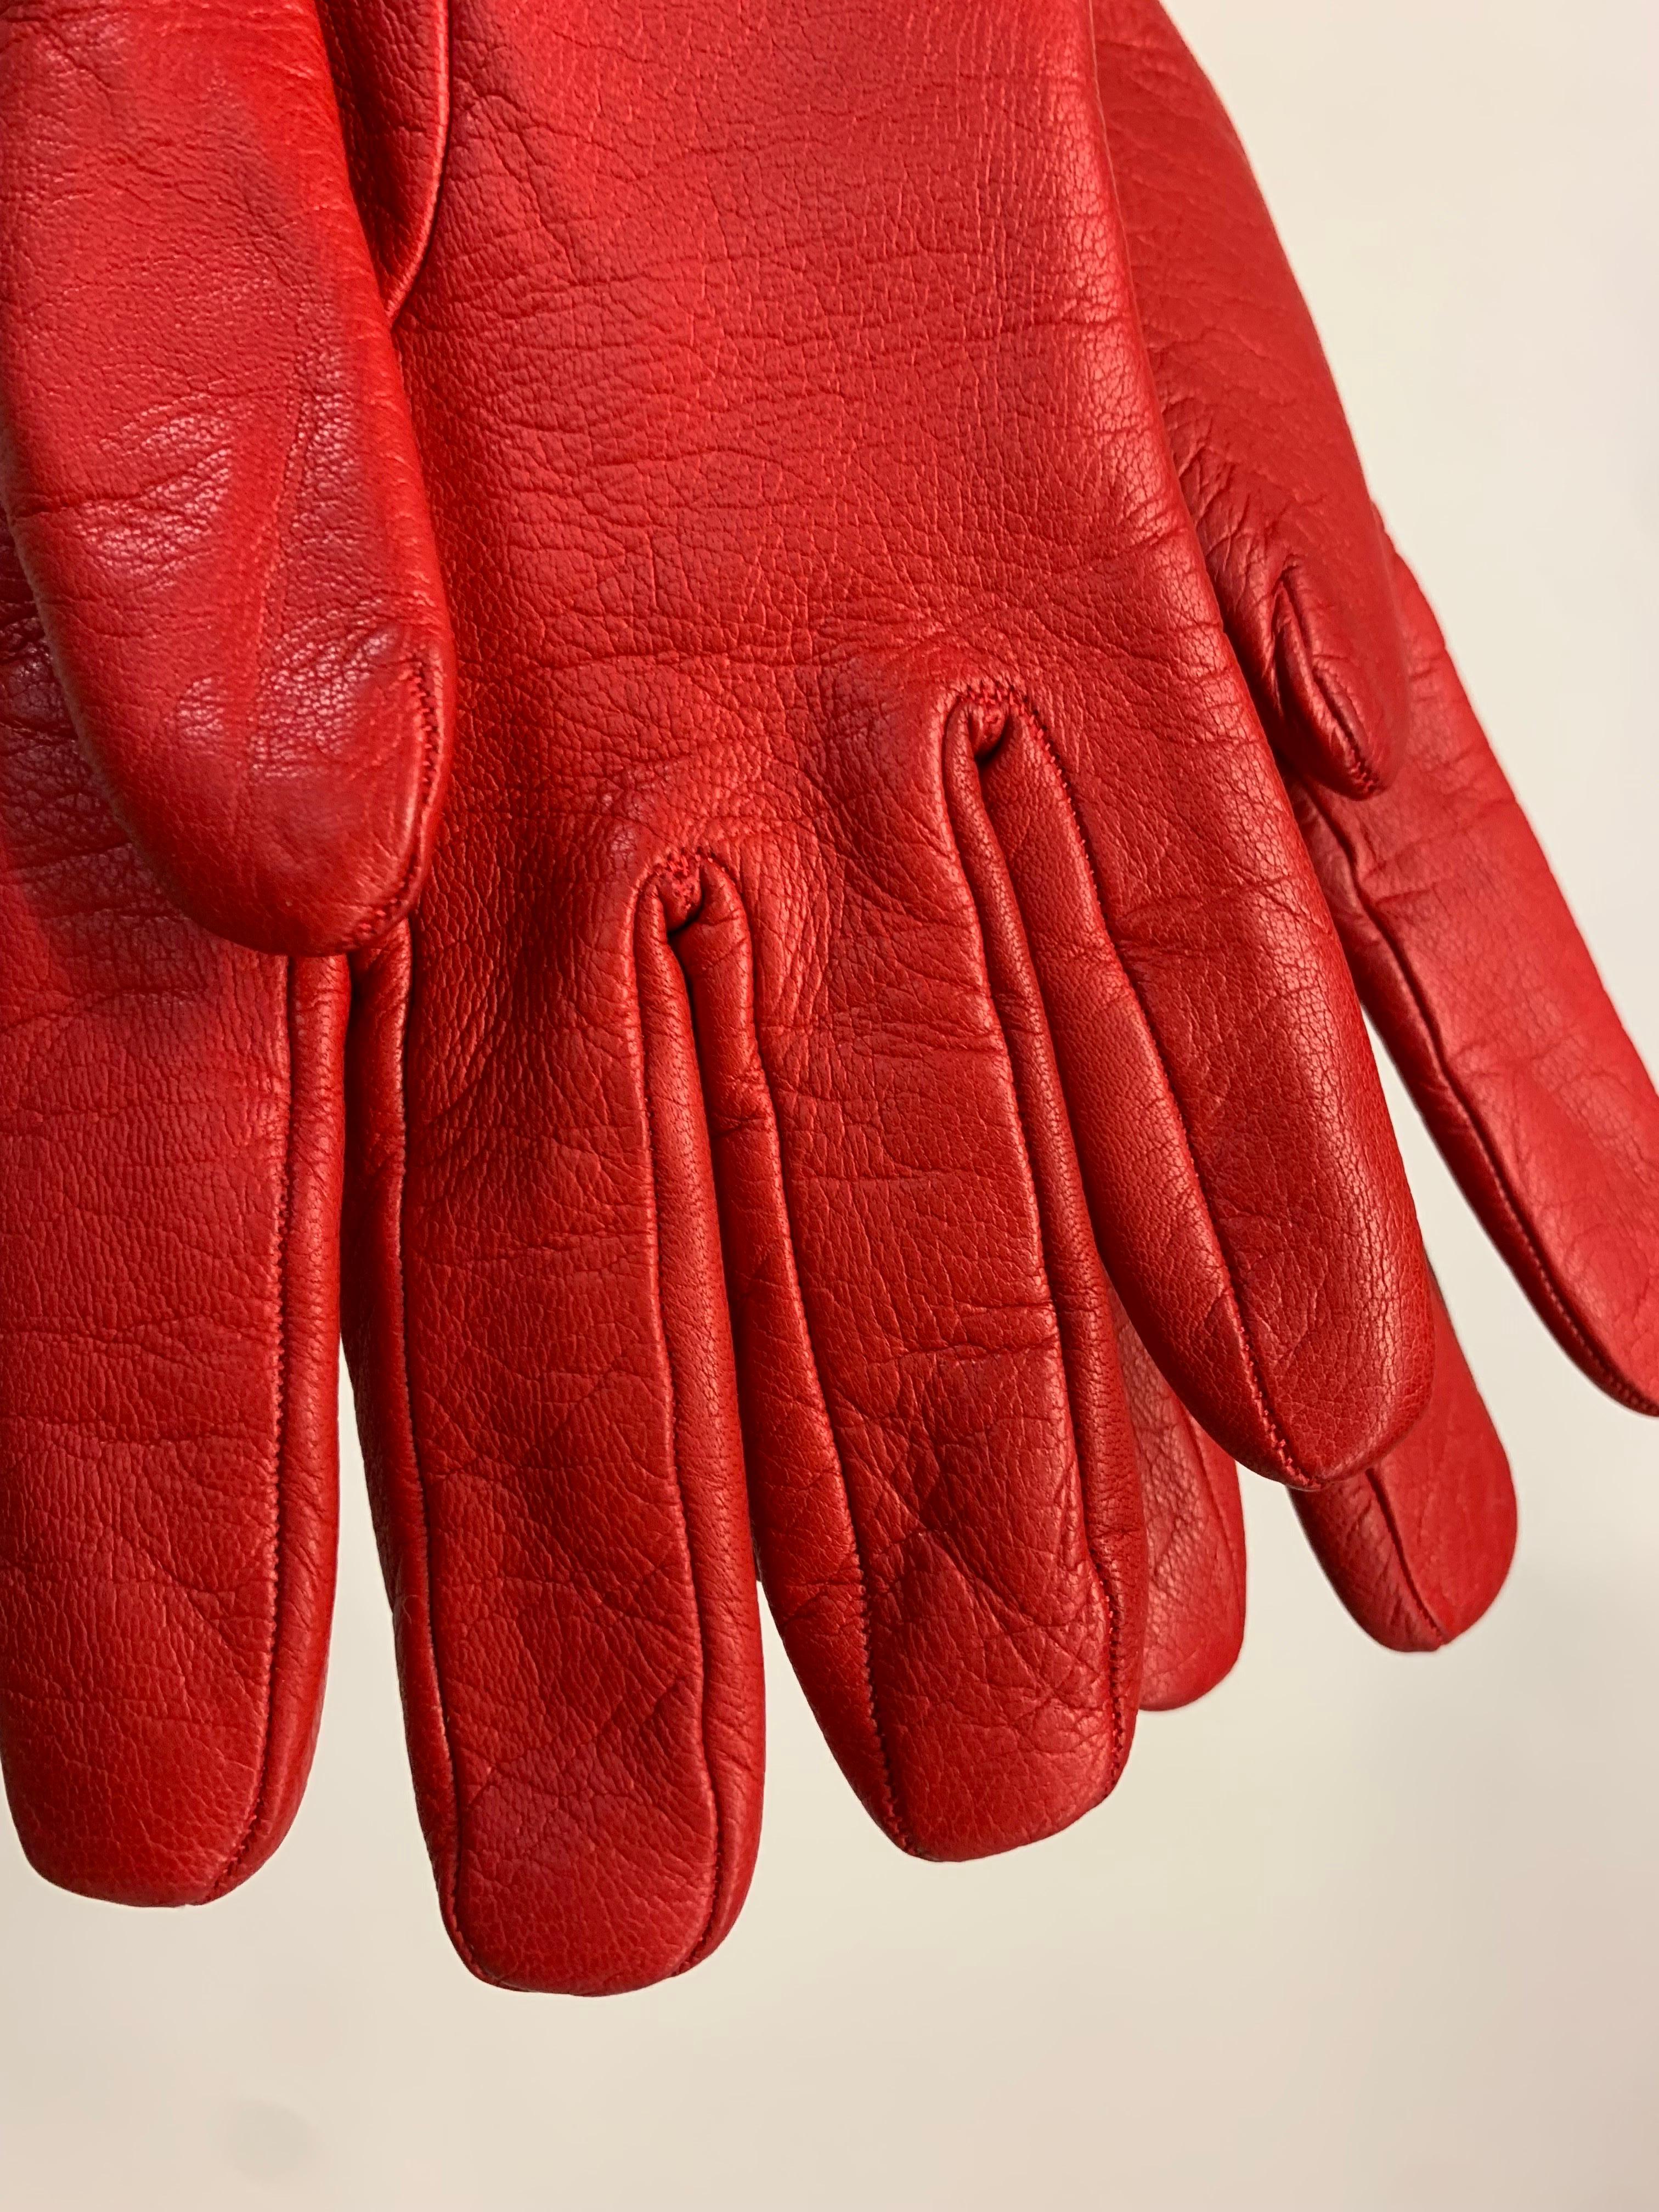 1980s Gianni Versace Red Kid Leather Gloves w Cashmere Lining & Tassel Chain  For Sale 8